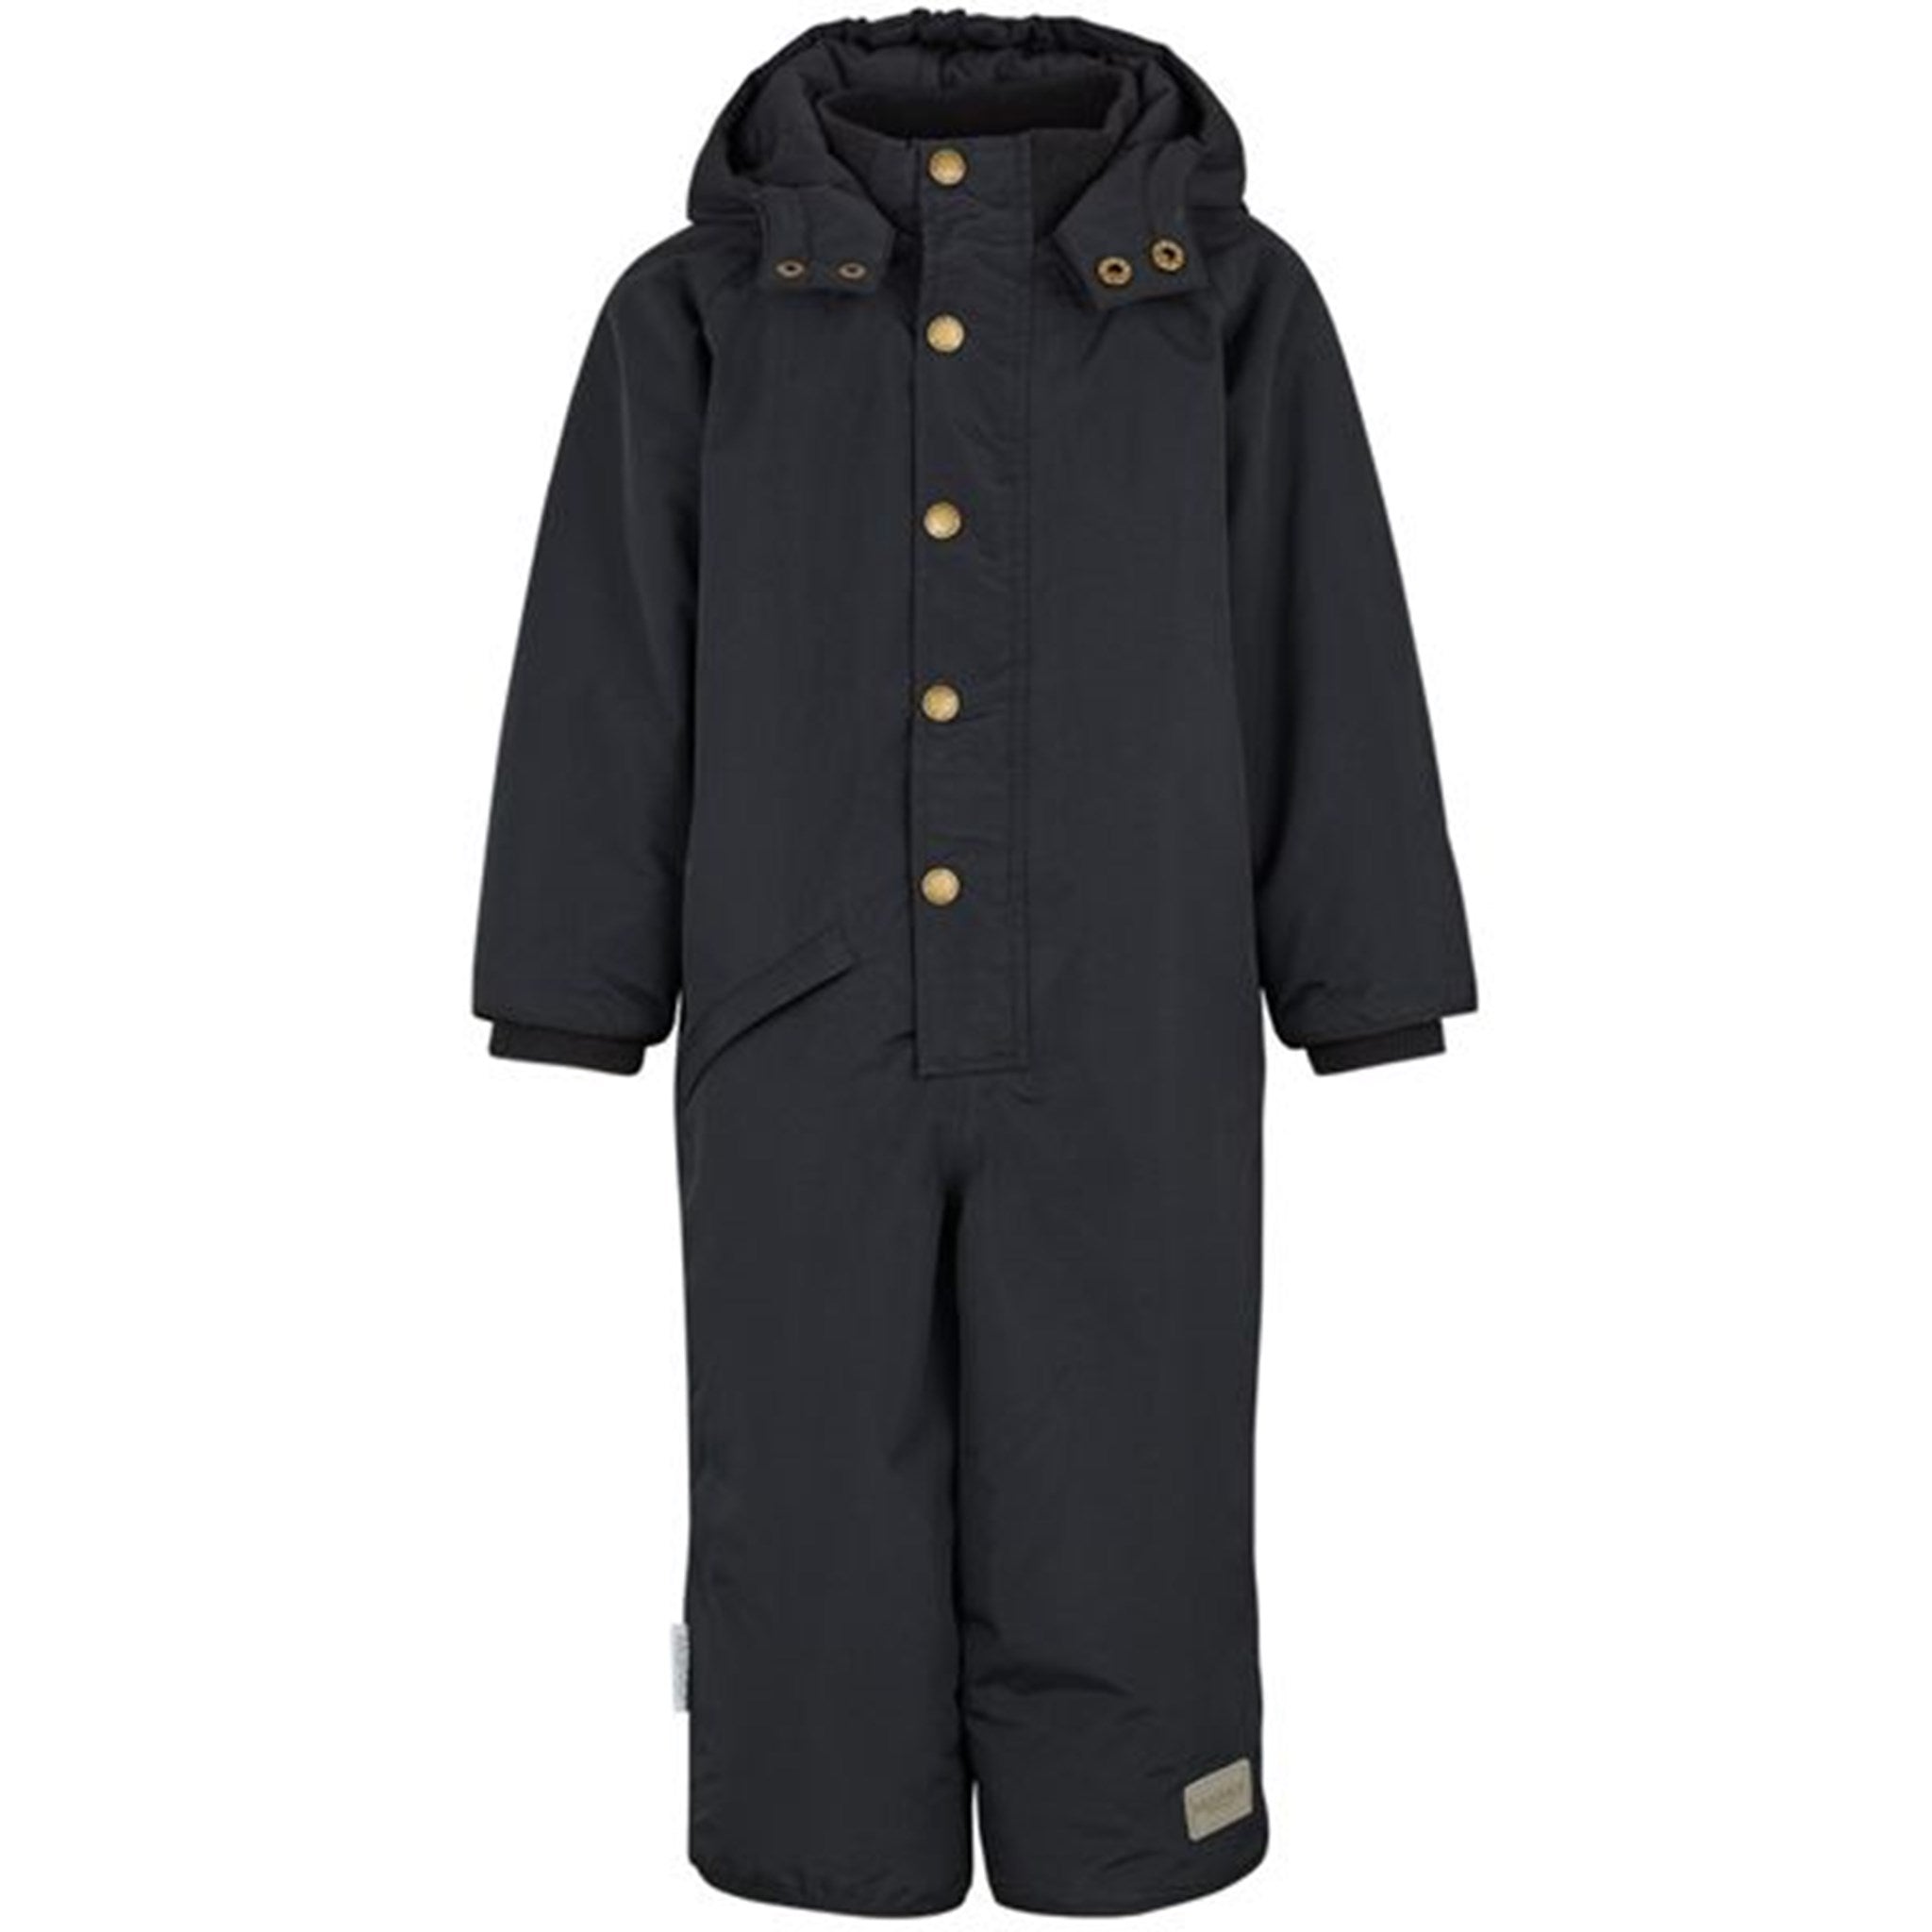 MarMar Overall Ollie Black Technical Outerwear